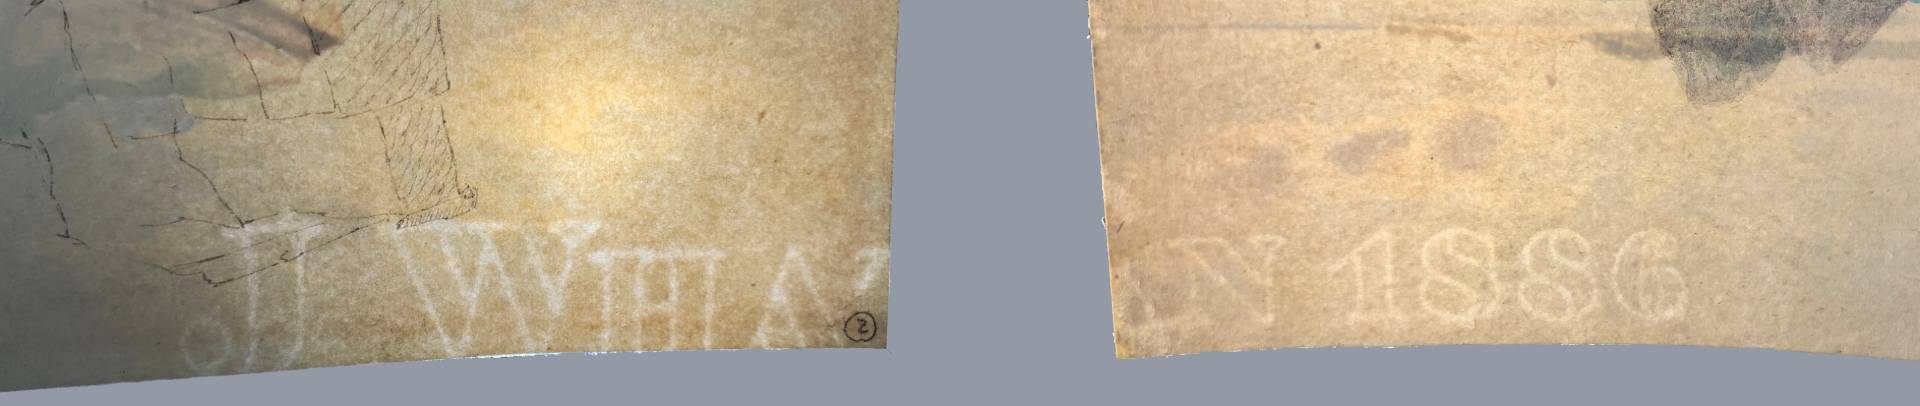 Using transmitted light to show the ‘J Whatman’ and ‘1886’ watermarks that were revealed after the backing removal